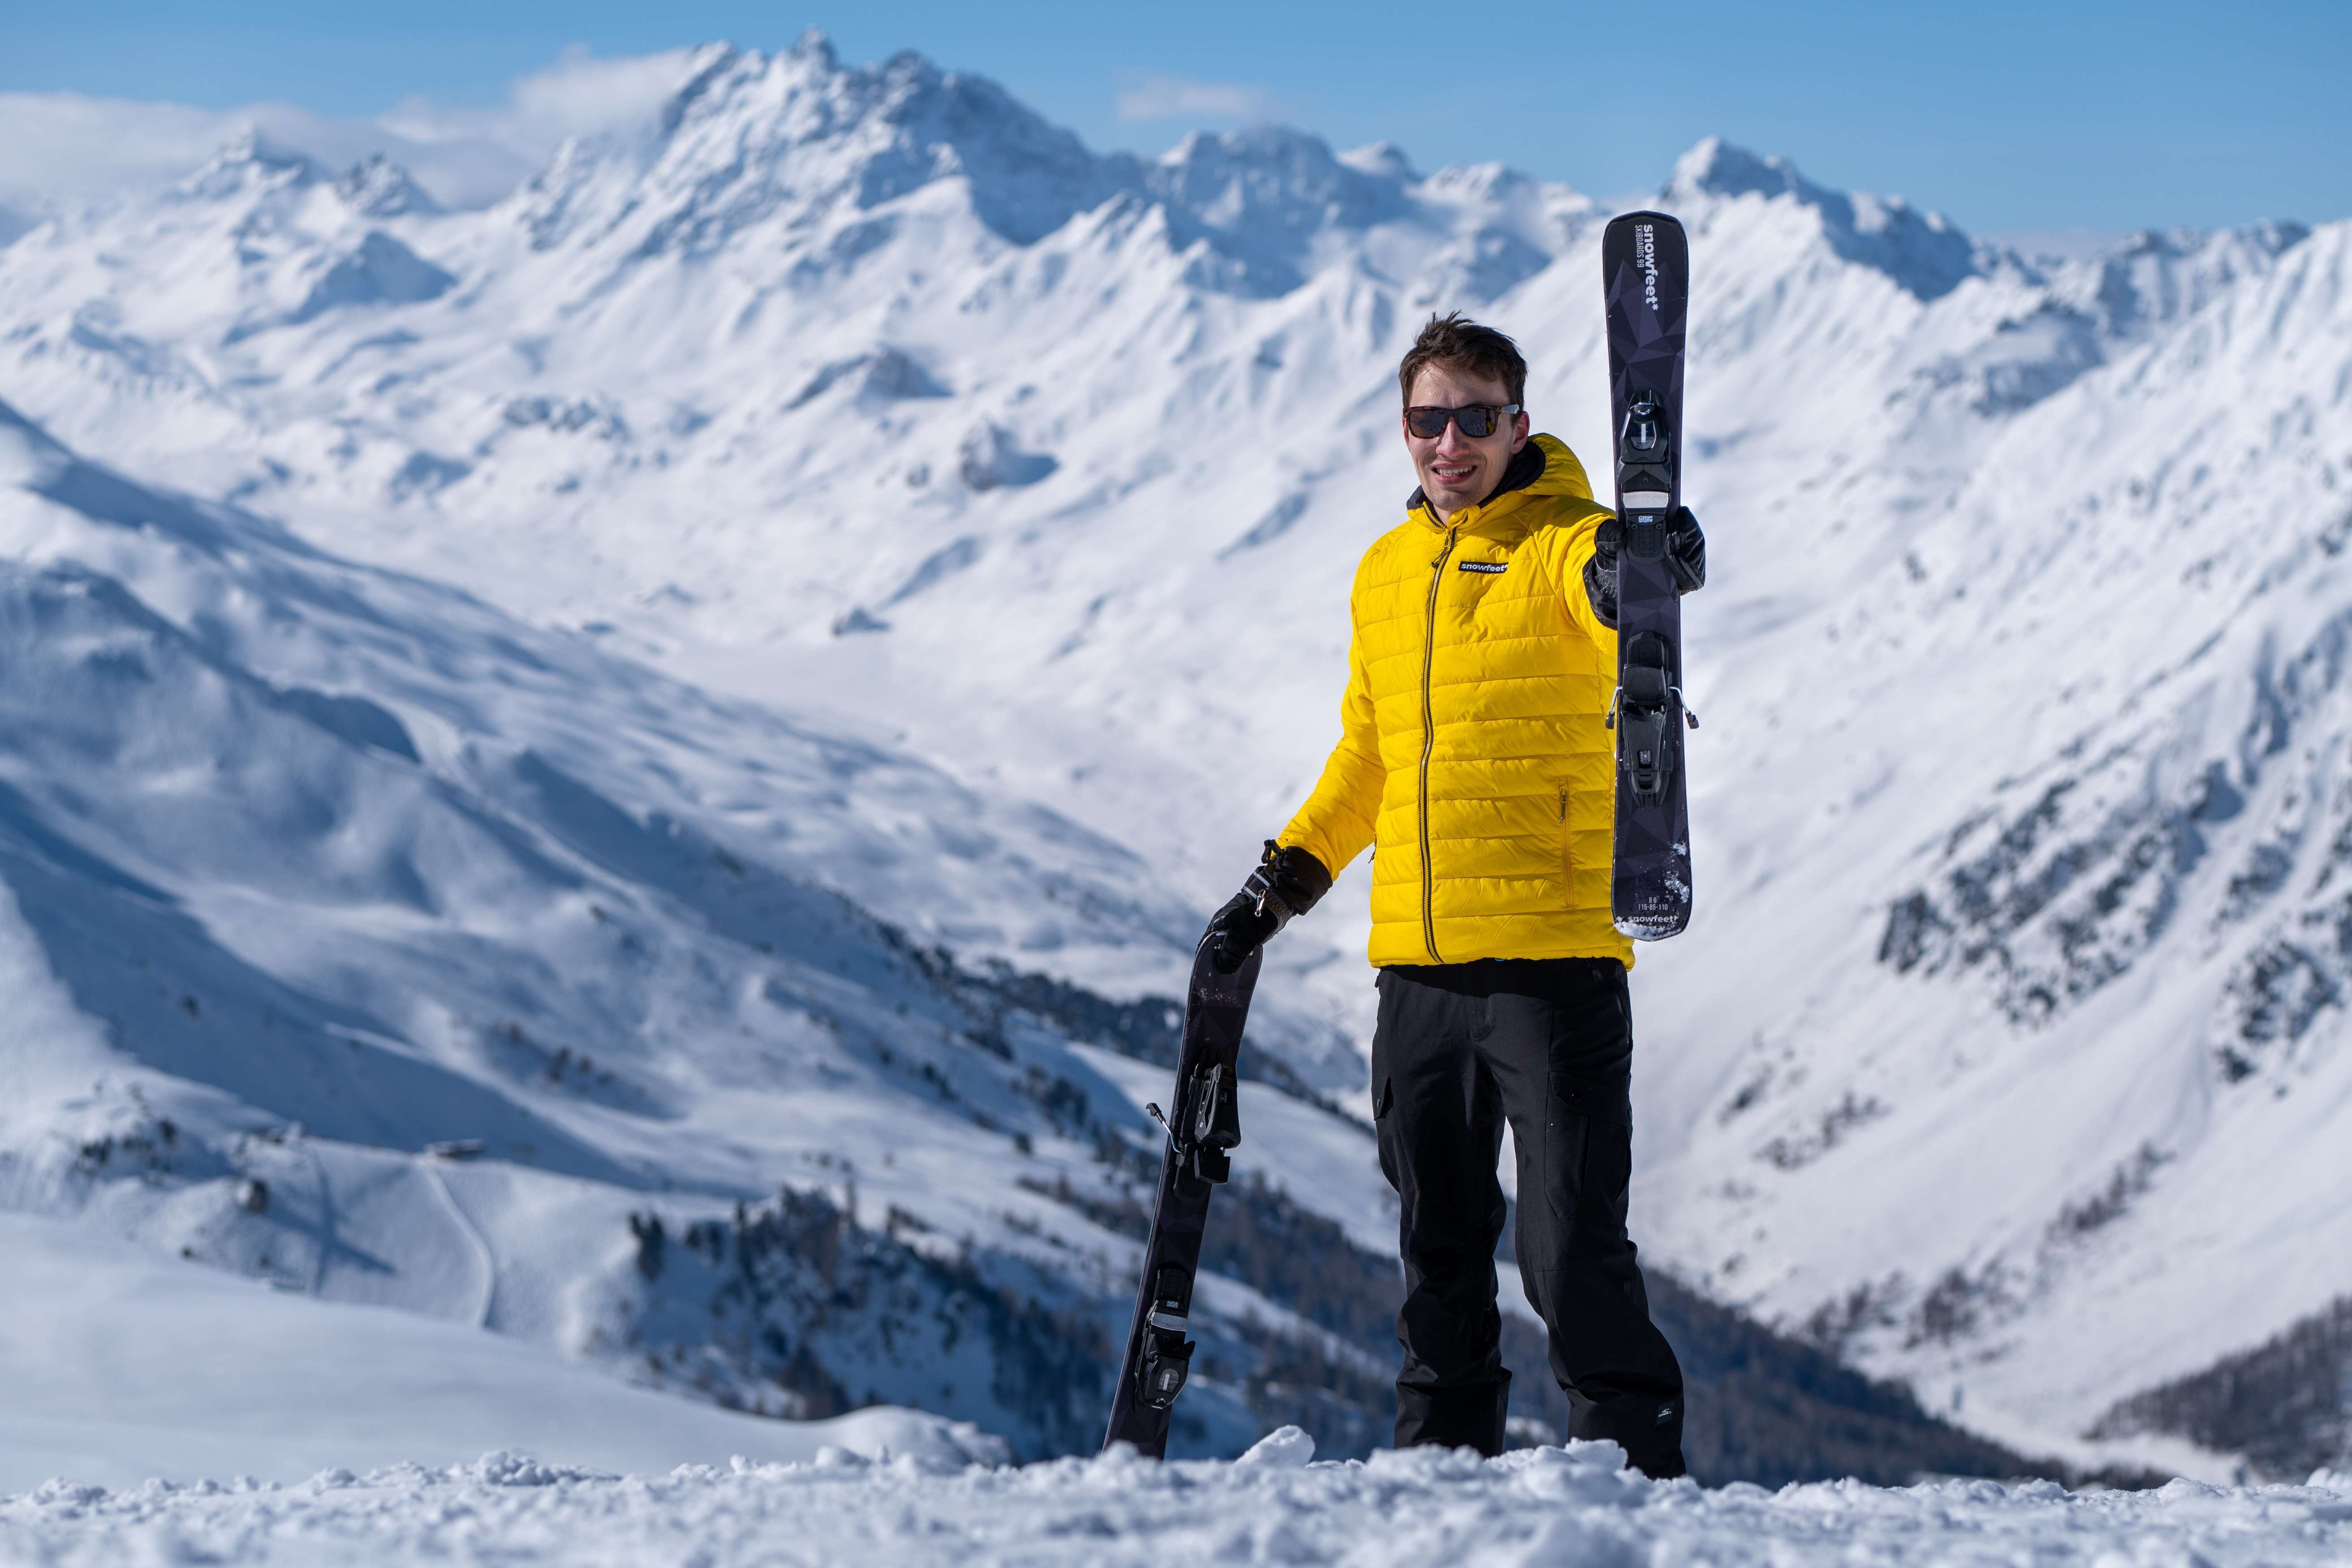 Snowblades  | Skiboards | Skiblades - All You Need To Know About Short Skis